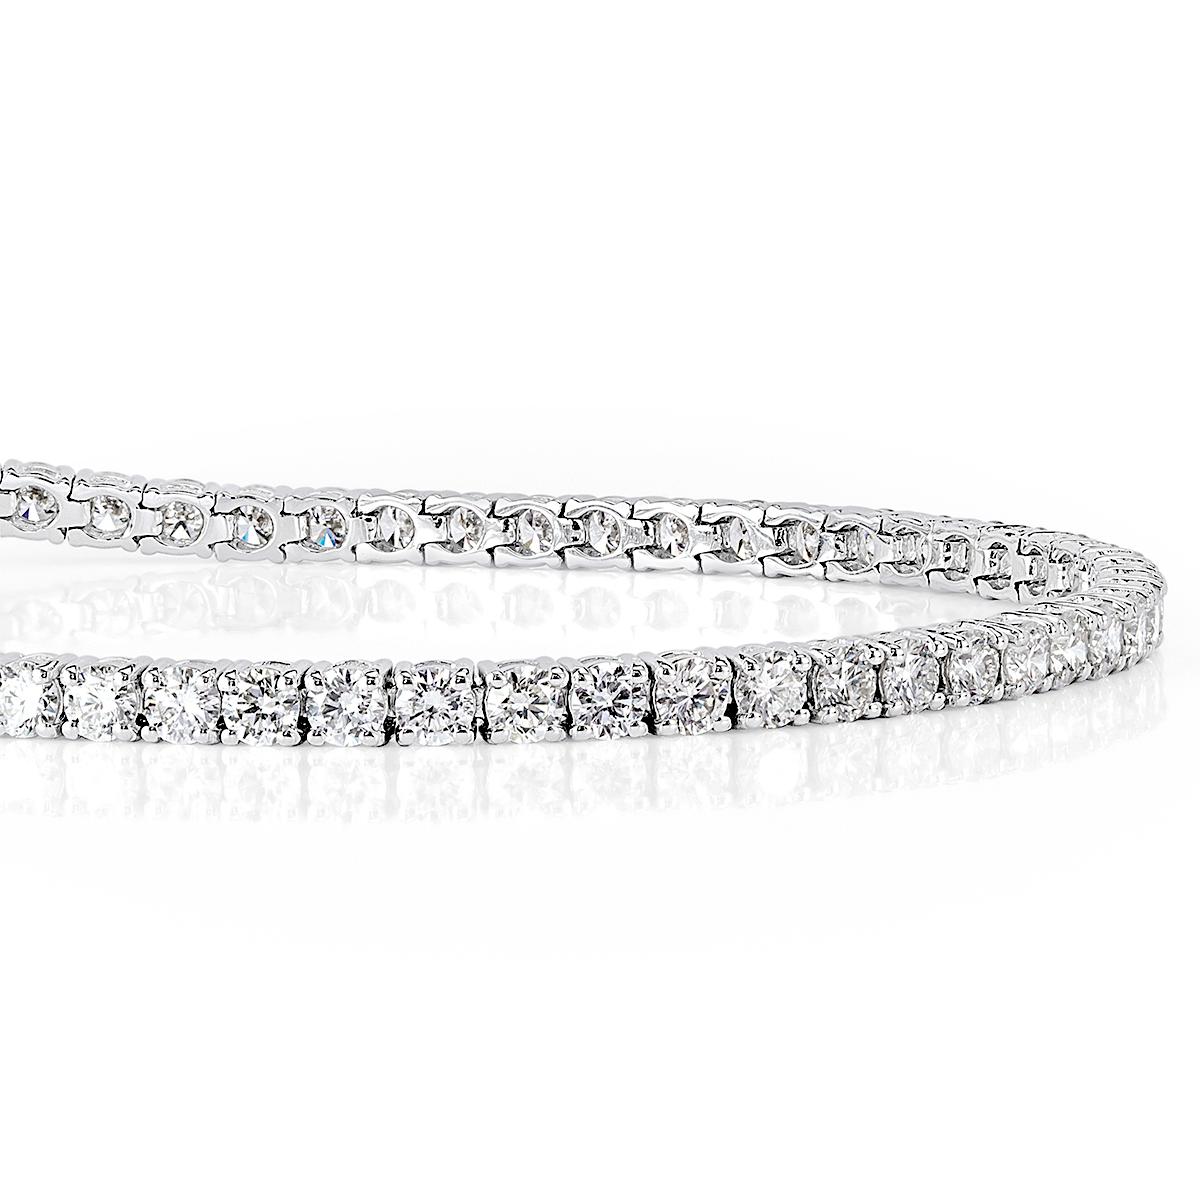 This classic diamond tennis bracelet showcases 4.35ct of round brilliant cut diamonds set in a classic 14k white gold, four prong setting. The diamonds face up peerless white and are absolutely eye clean. It features a double safety clasp for added